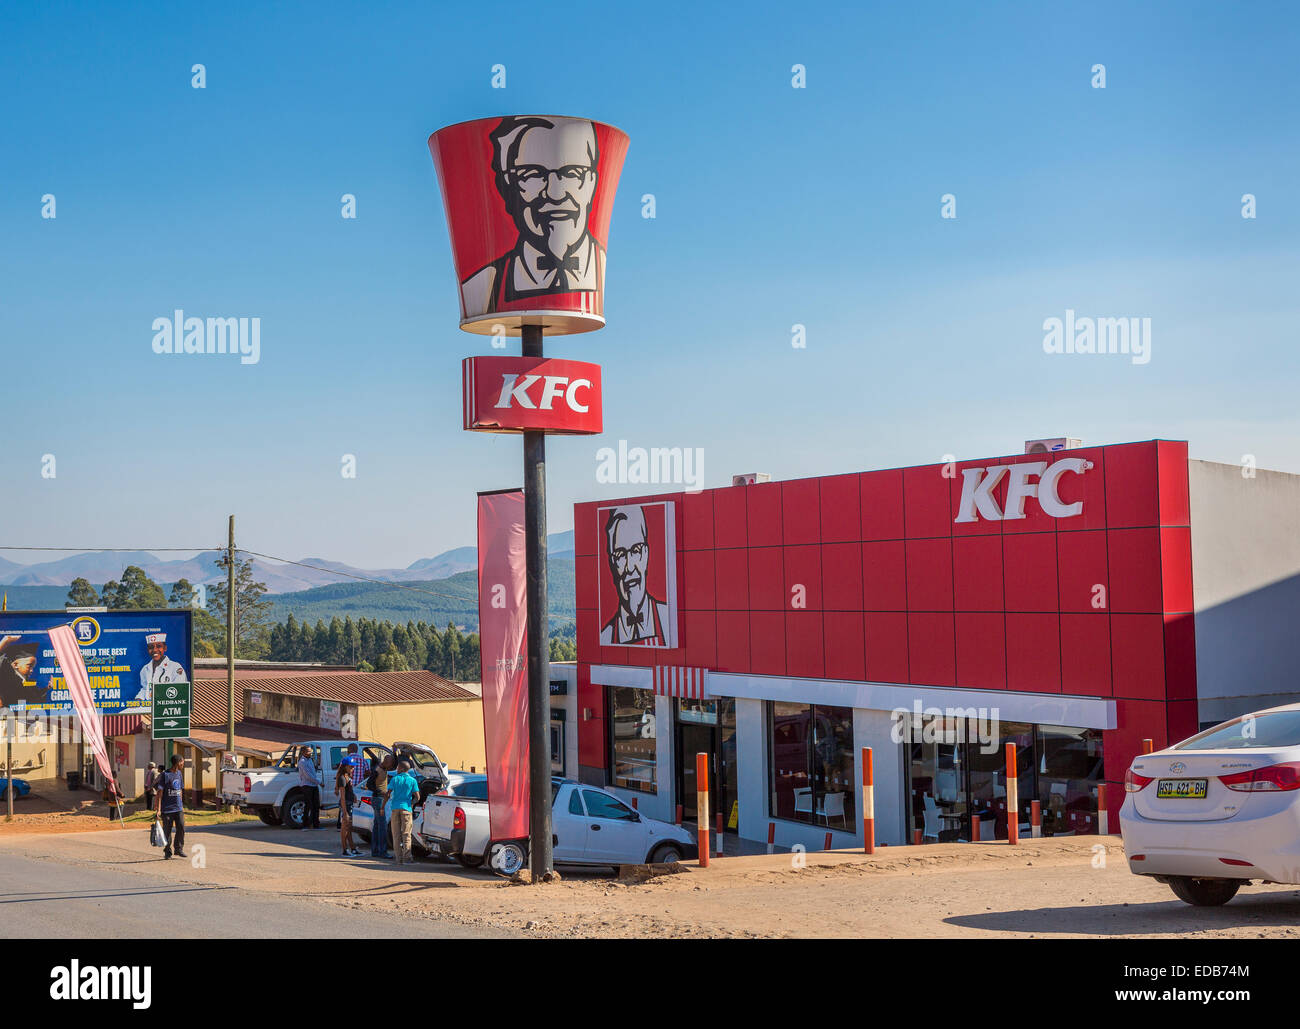 PIGGS PEAK, HHOHHO, SWAZILAND, AFRICA -Kentucky Fried Chicken fast food restaurant and KFC sign, and people on street. Stock Photo